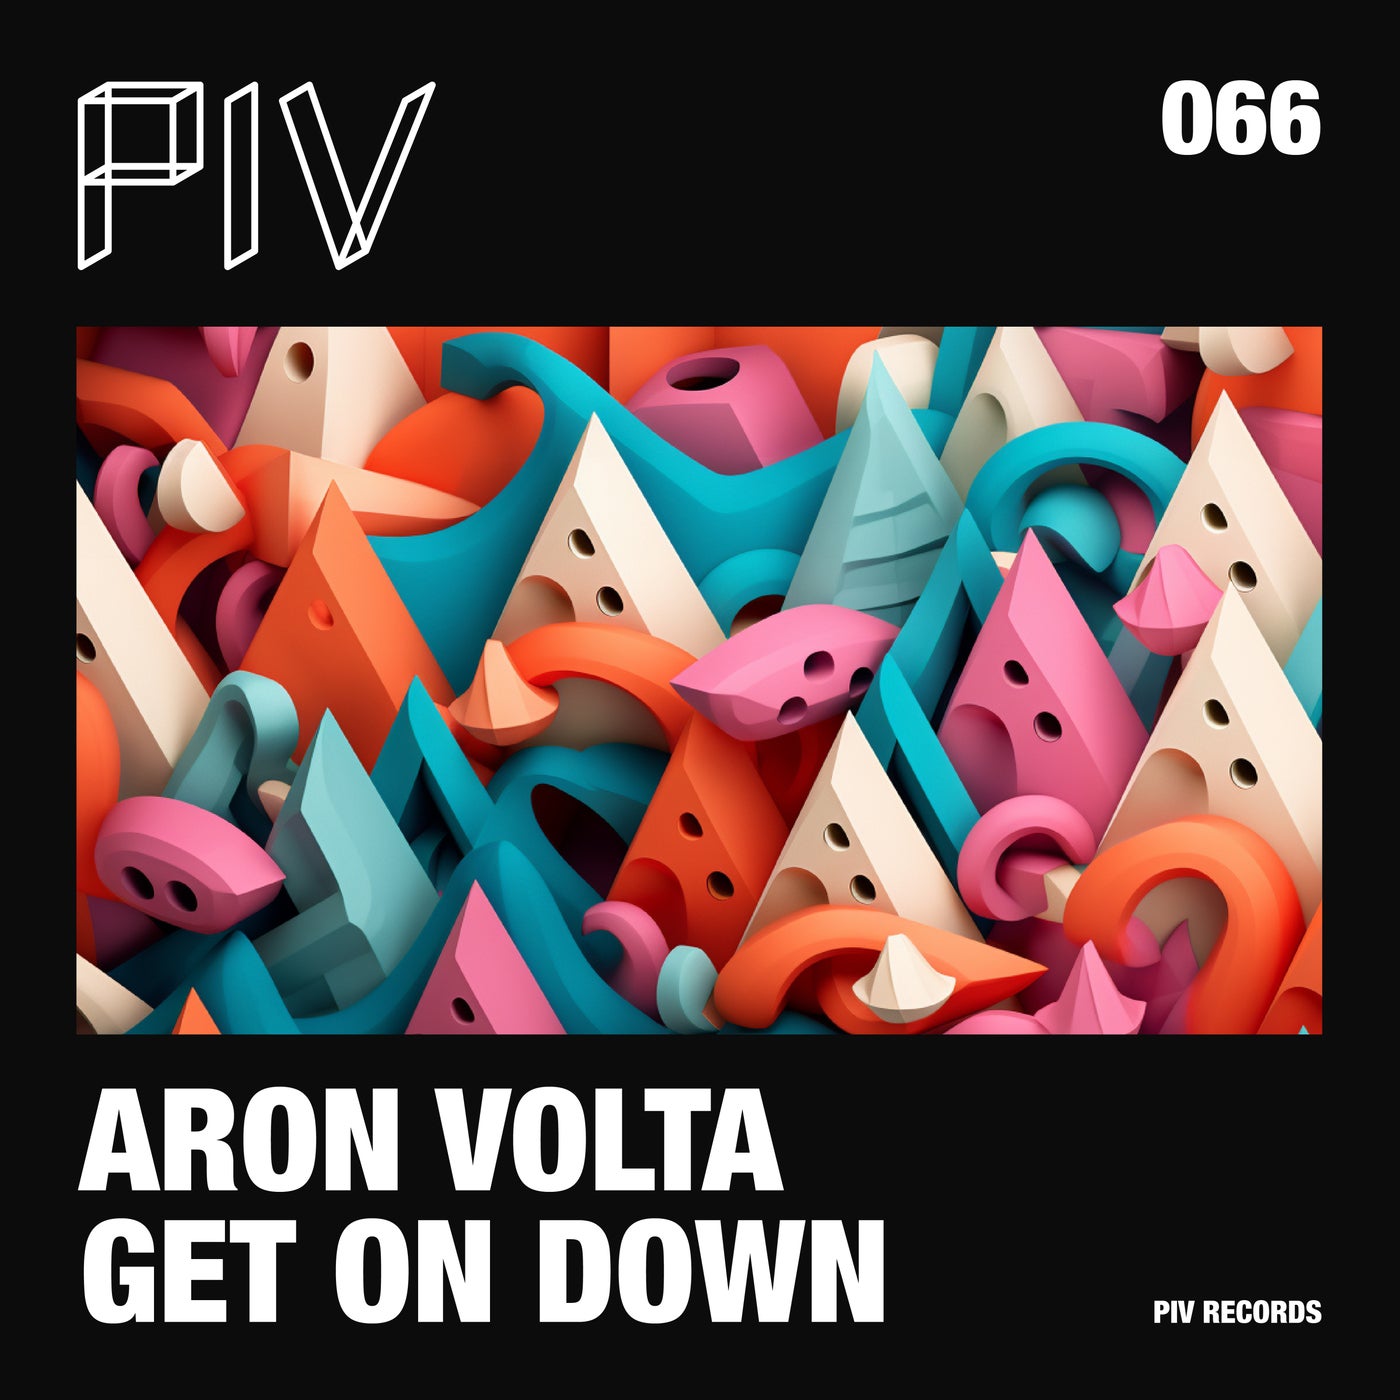 image cover: Aron Volta - Get On Down on PIV